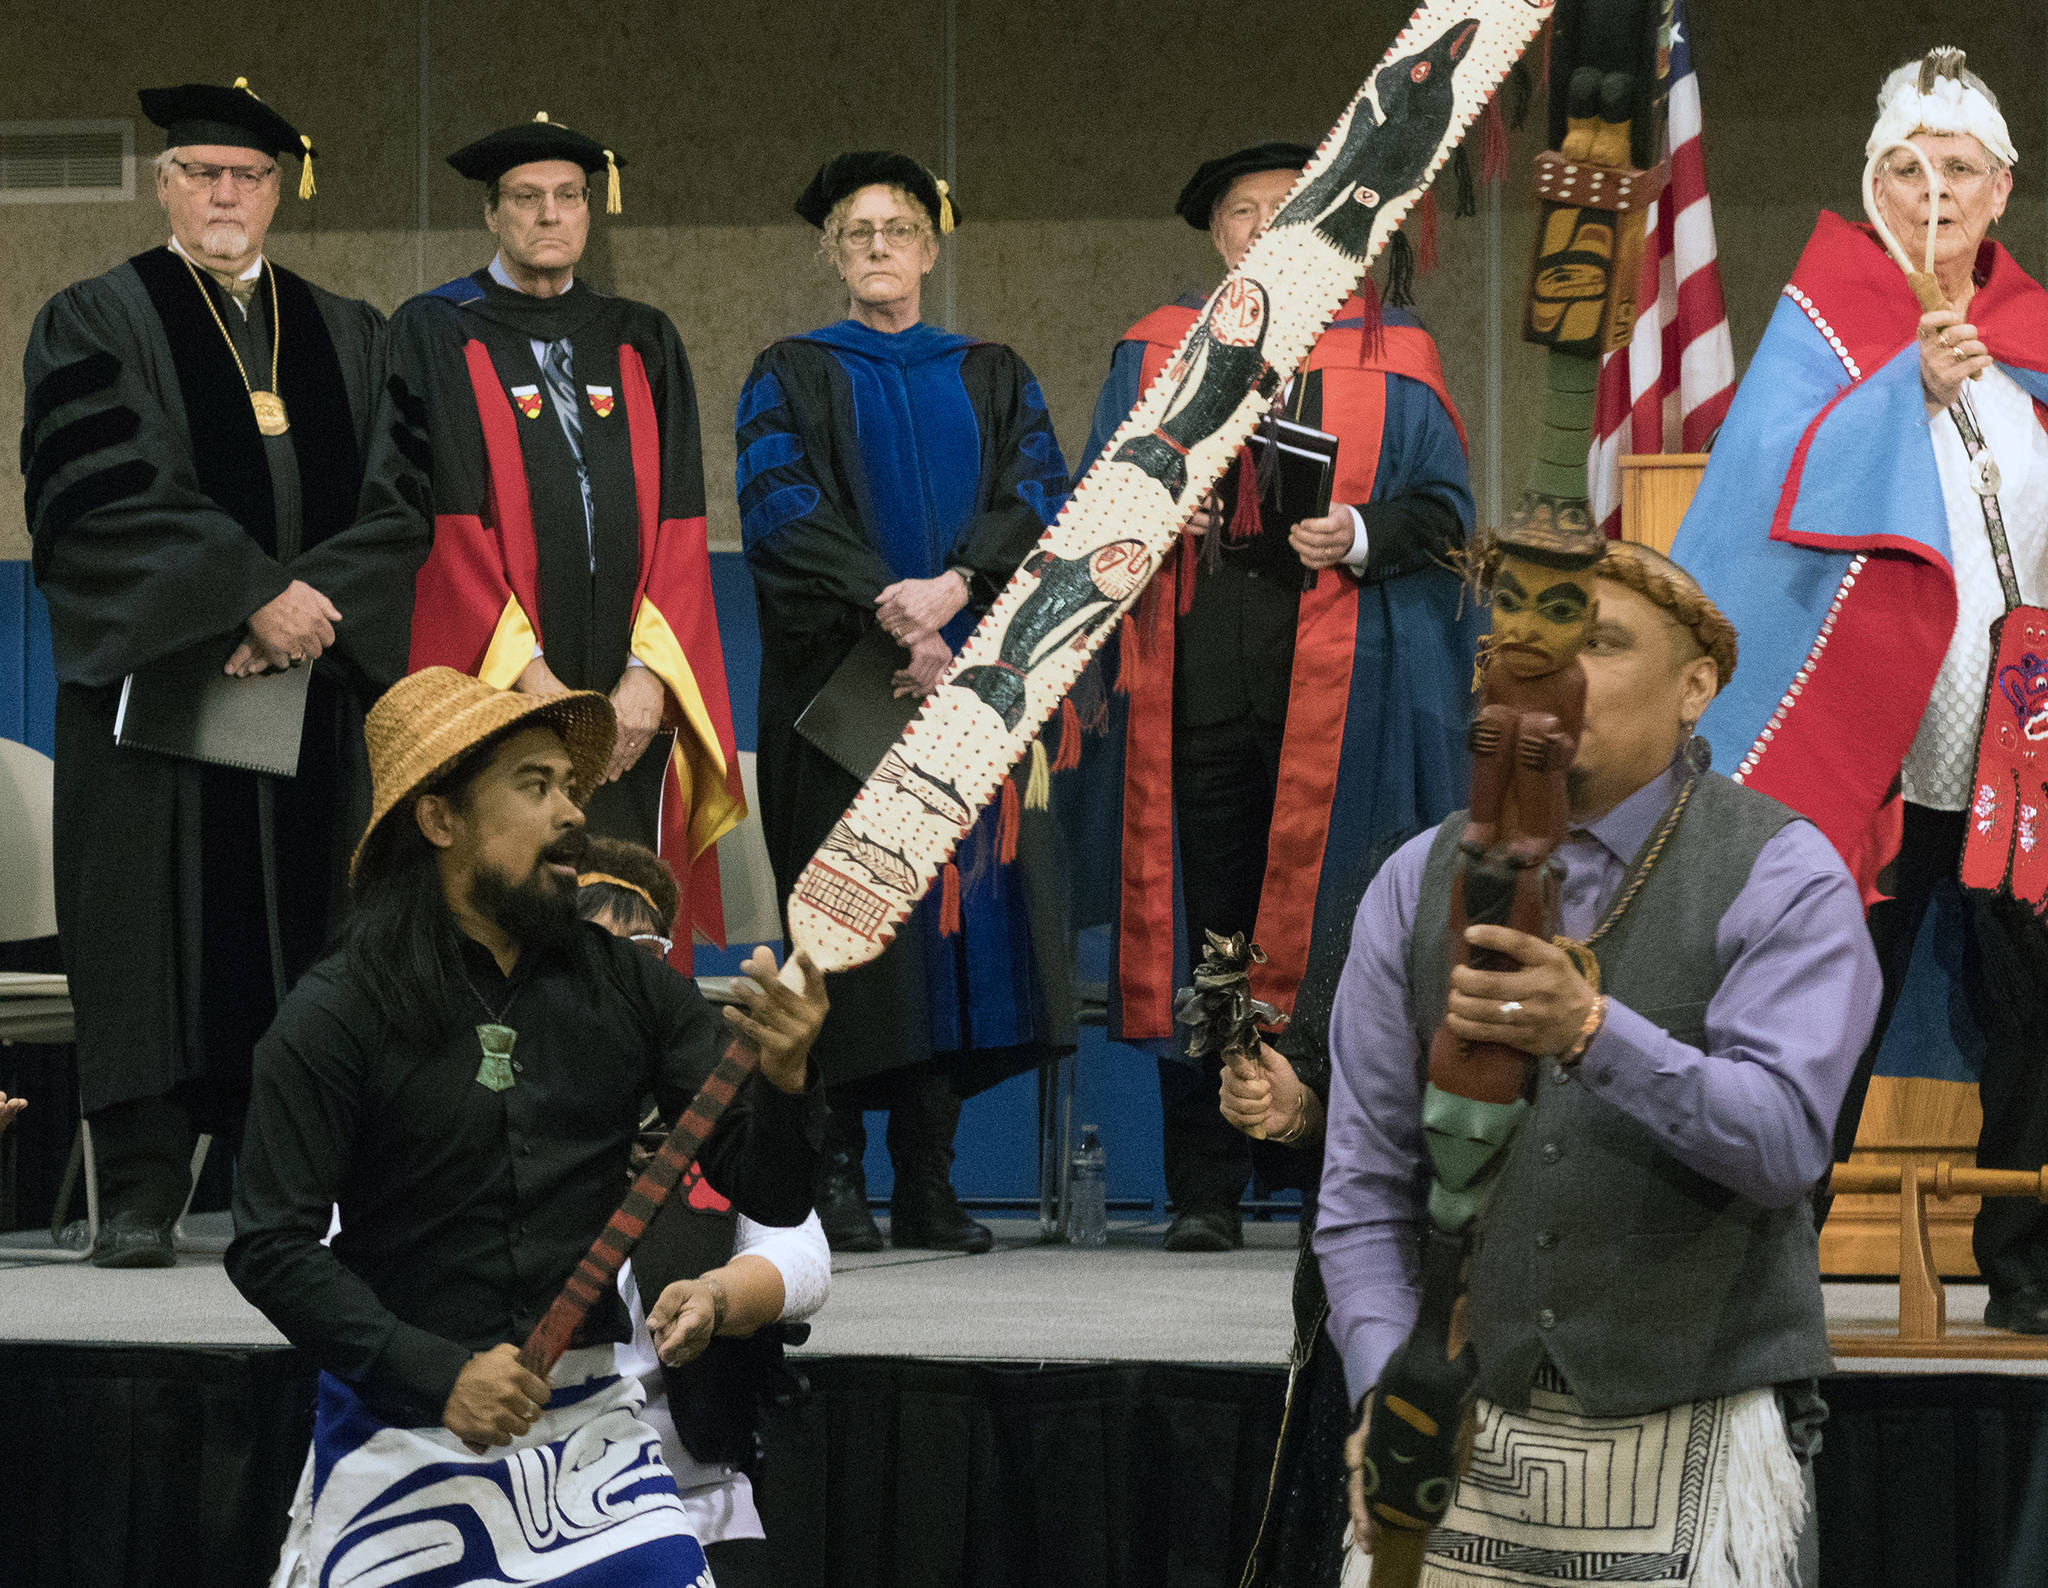 Mt. Juneau Tlingit and Woosh.ji.een dancers complete the academic procession which started the University of Alaska Southeast commencement ceremony Sunday, May 5, 2019. (Erin Laughlin | For the Juneau Empire)